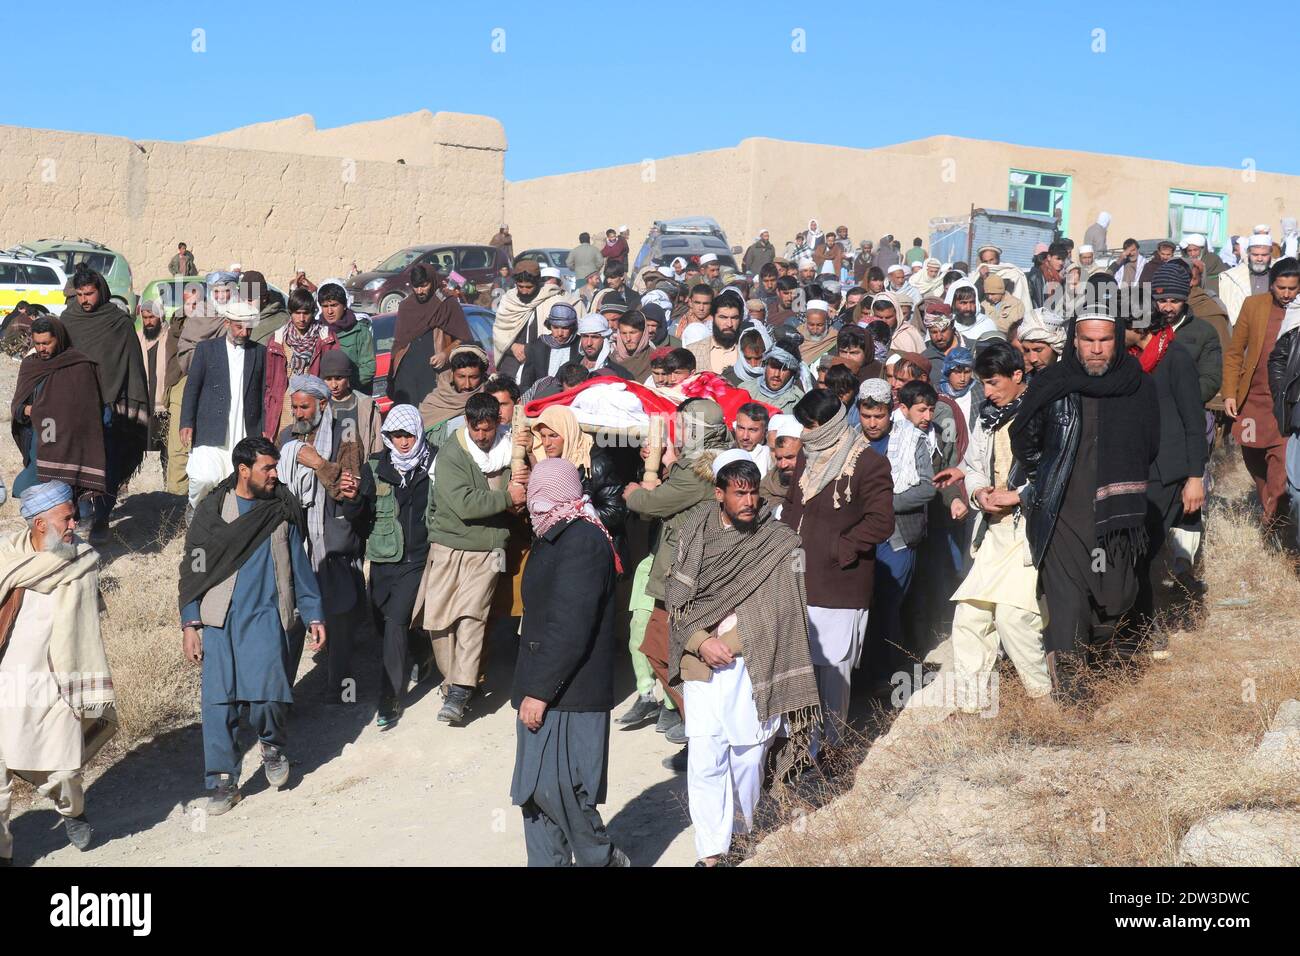 Ghazni, Afghanistan. 22nd Dec, 2020. People attend the funeral of freelance journalist Ramatullah Nikzad in Khoja Omari district of Ghazni province, Afghanistan, on Dec. 22, 2020. Freelance journalist and chairman of Provincial Journalists Association Ramatullah Nikzad was shot by an assailant holding a silenced pistol near his house in Khwaja Hakim, an area in provincial capital Ghazni city on Monday evening, Ahmad Khan Sirt from Ghazni police told Xinhua. Credit: Rohullah/Xinhua/Alamy Live News Stock Photo